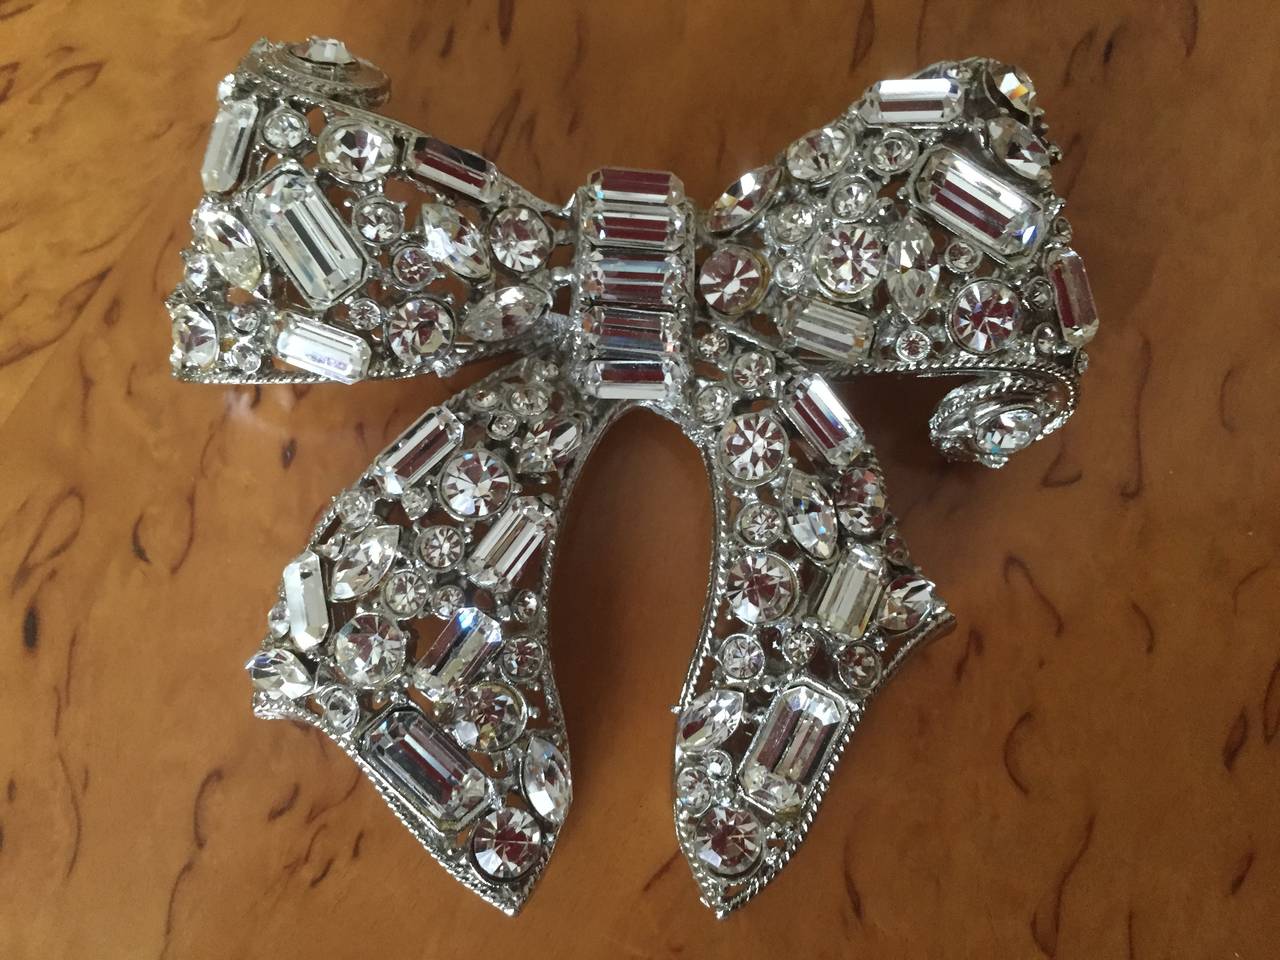 Giant Swarovski crystal bow pin circa 1985
This was a runway piece , Bill Blass featured it at the bottom of the back, a stunning place to wear a large bow.